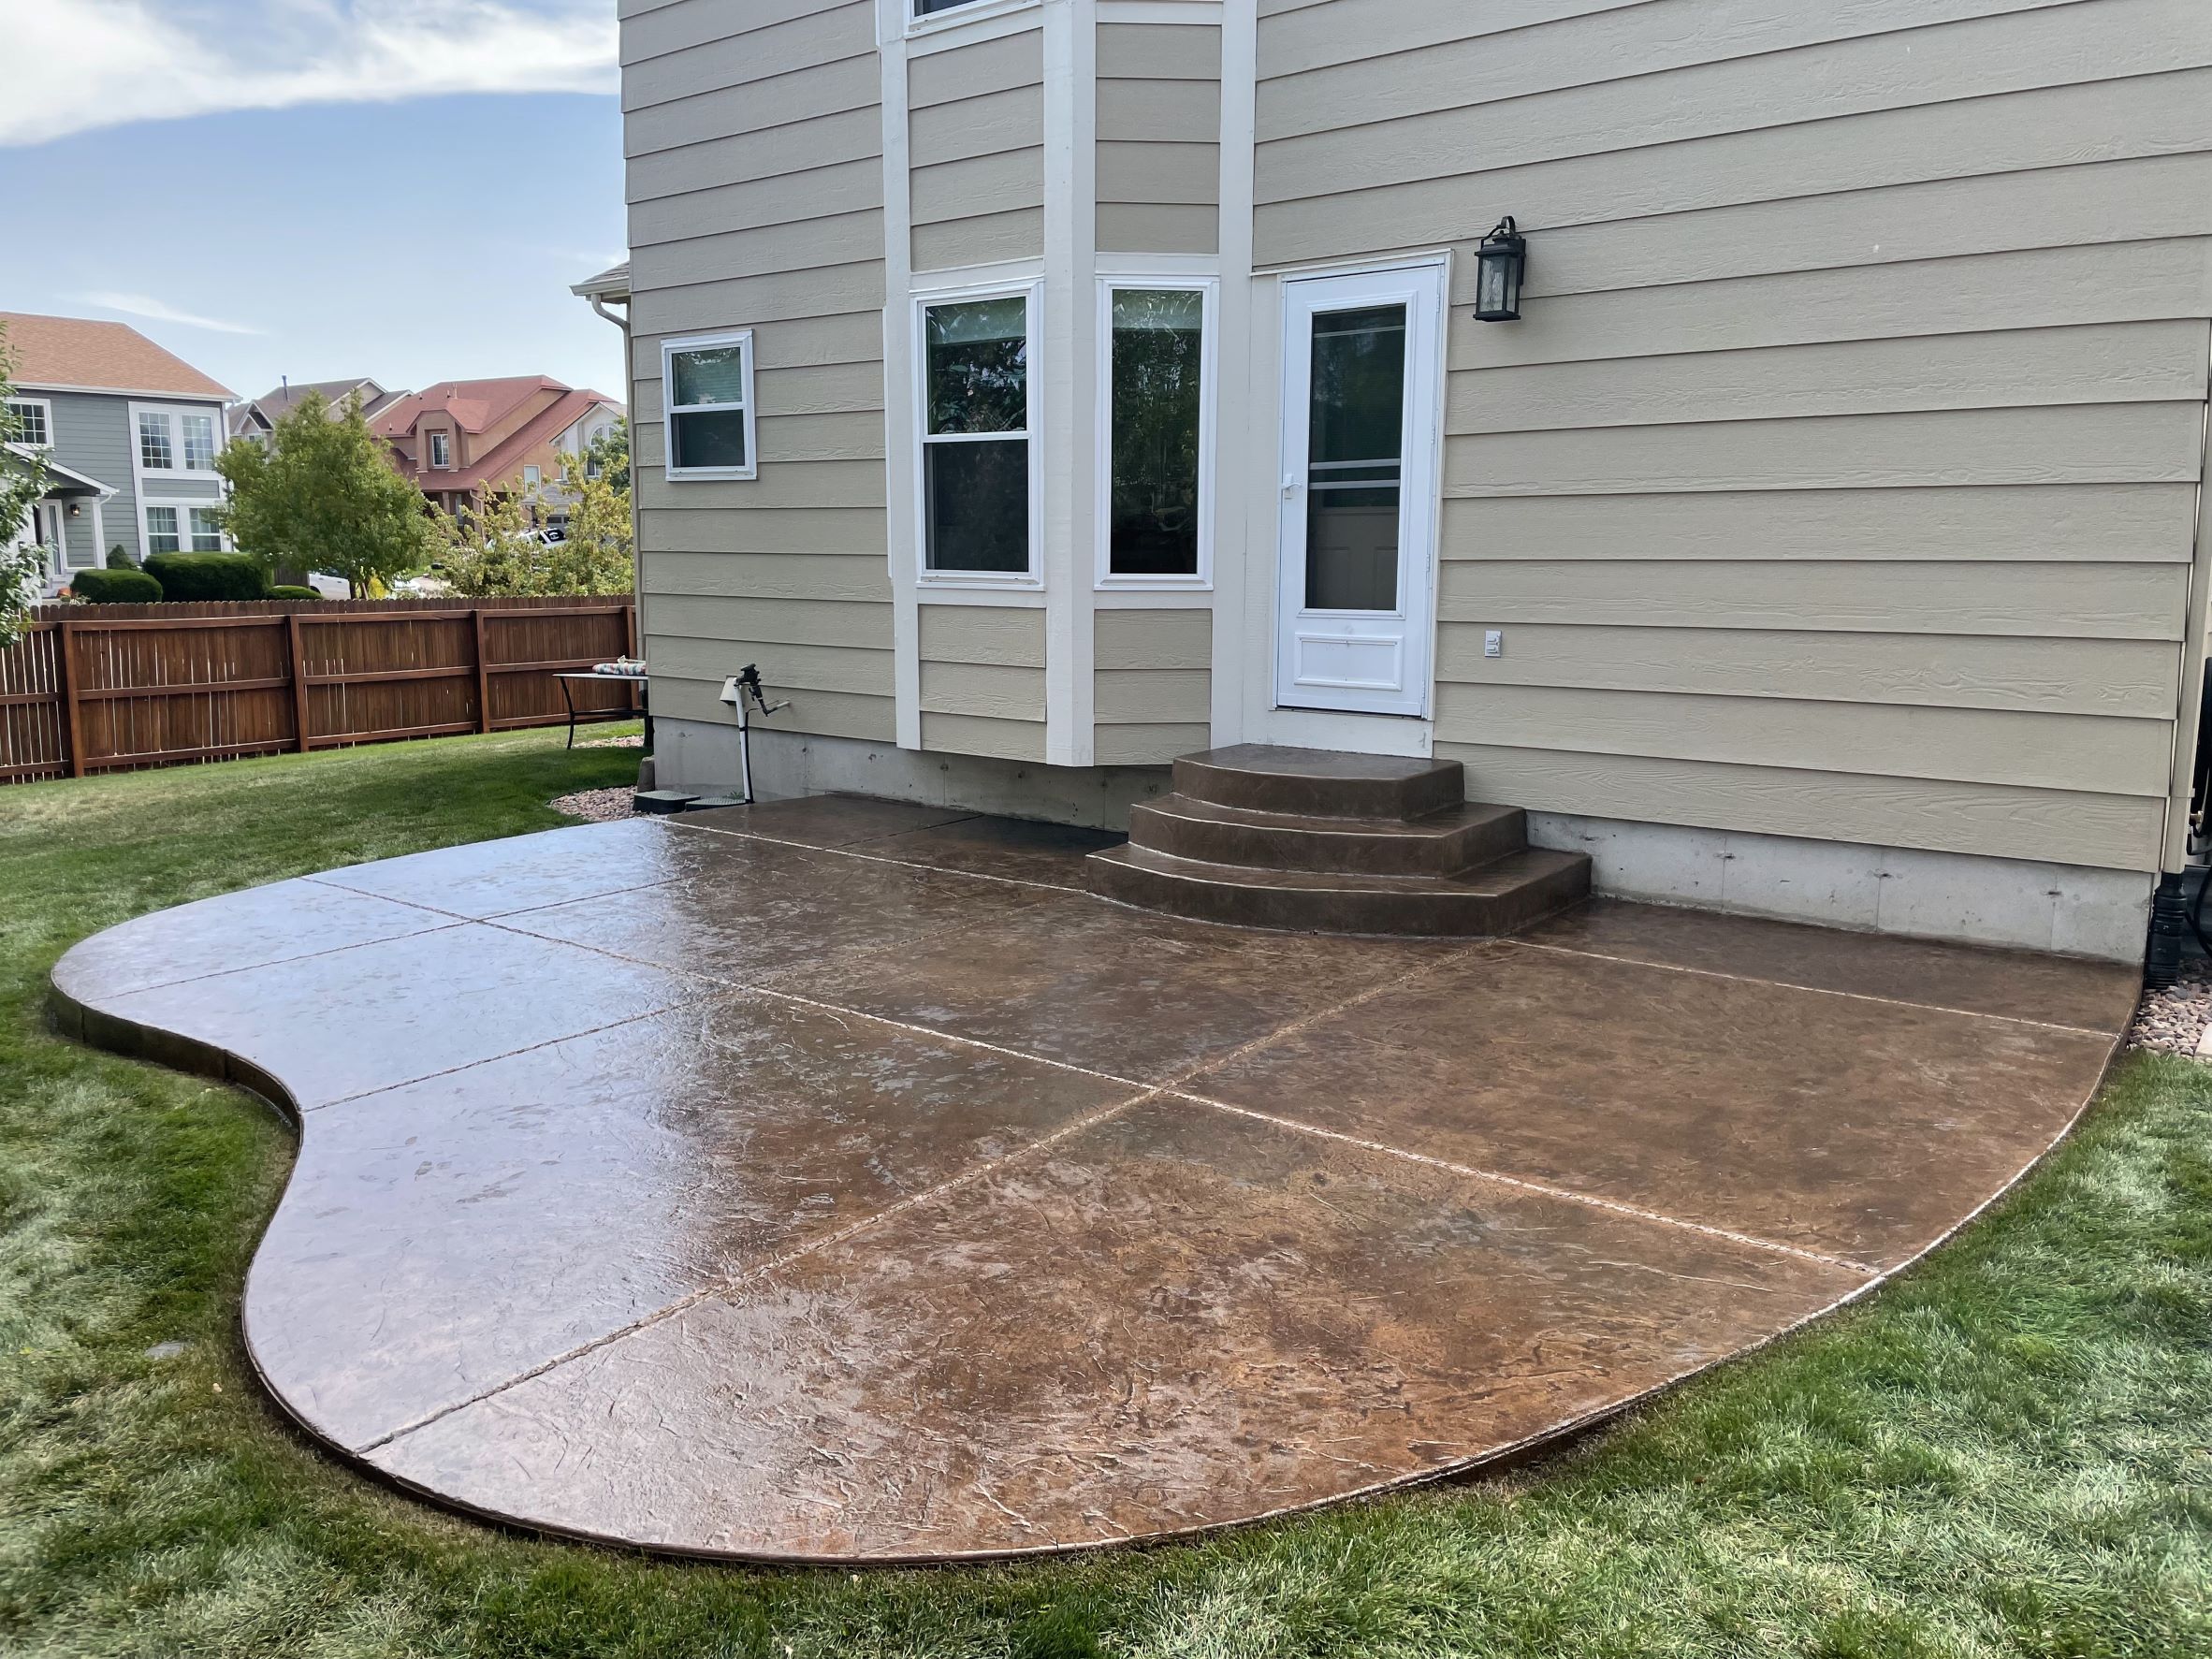 Revitalized integrally colored stamped concrete patio after application of Driftwood Antiquing™ Stain